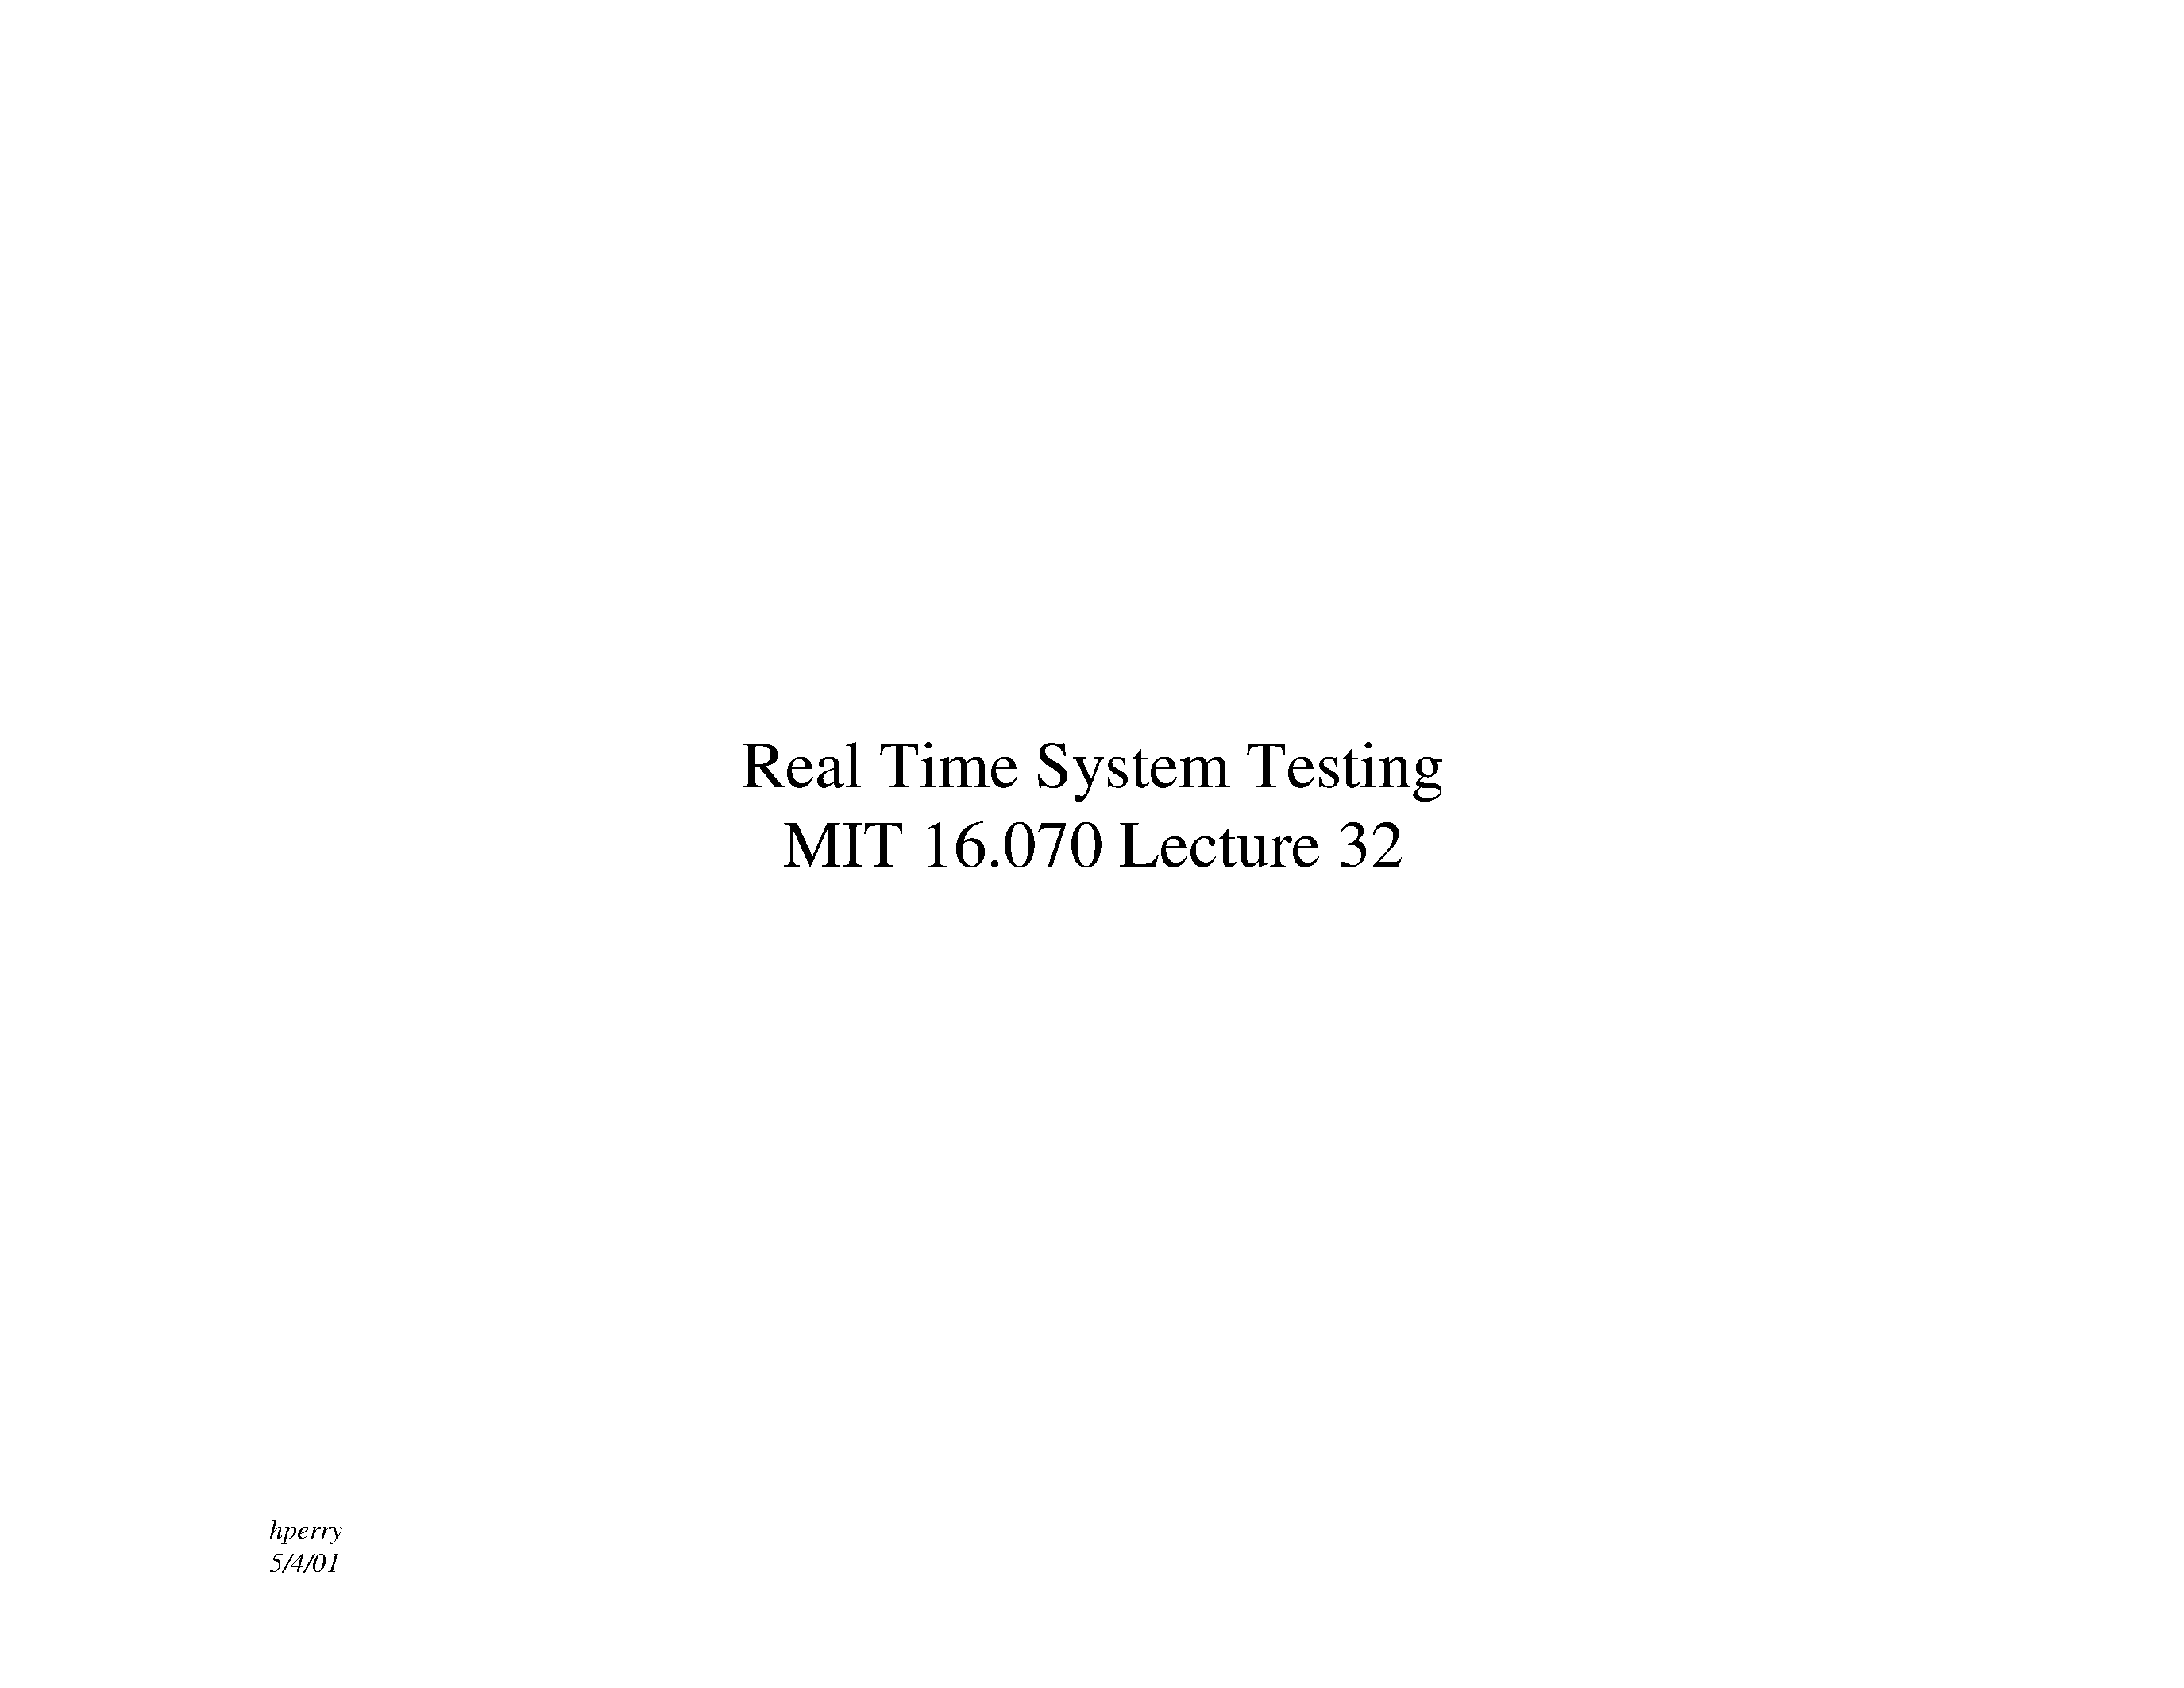 Даташит TL32 - Real Time System Testing MIT 16.070 Lecture 32 страница 1